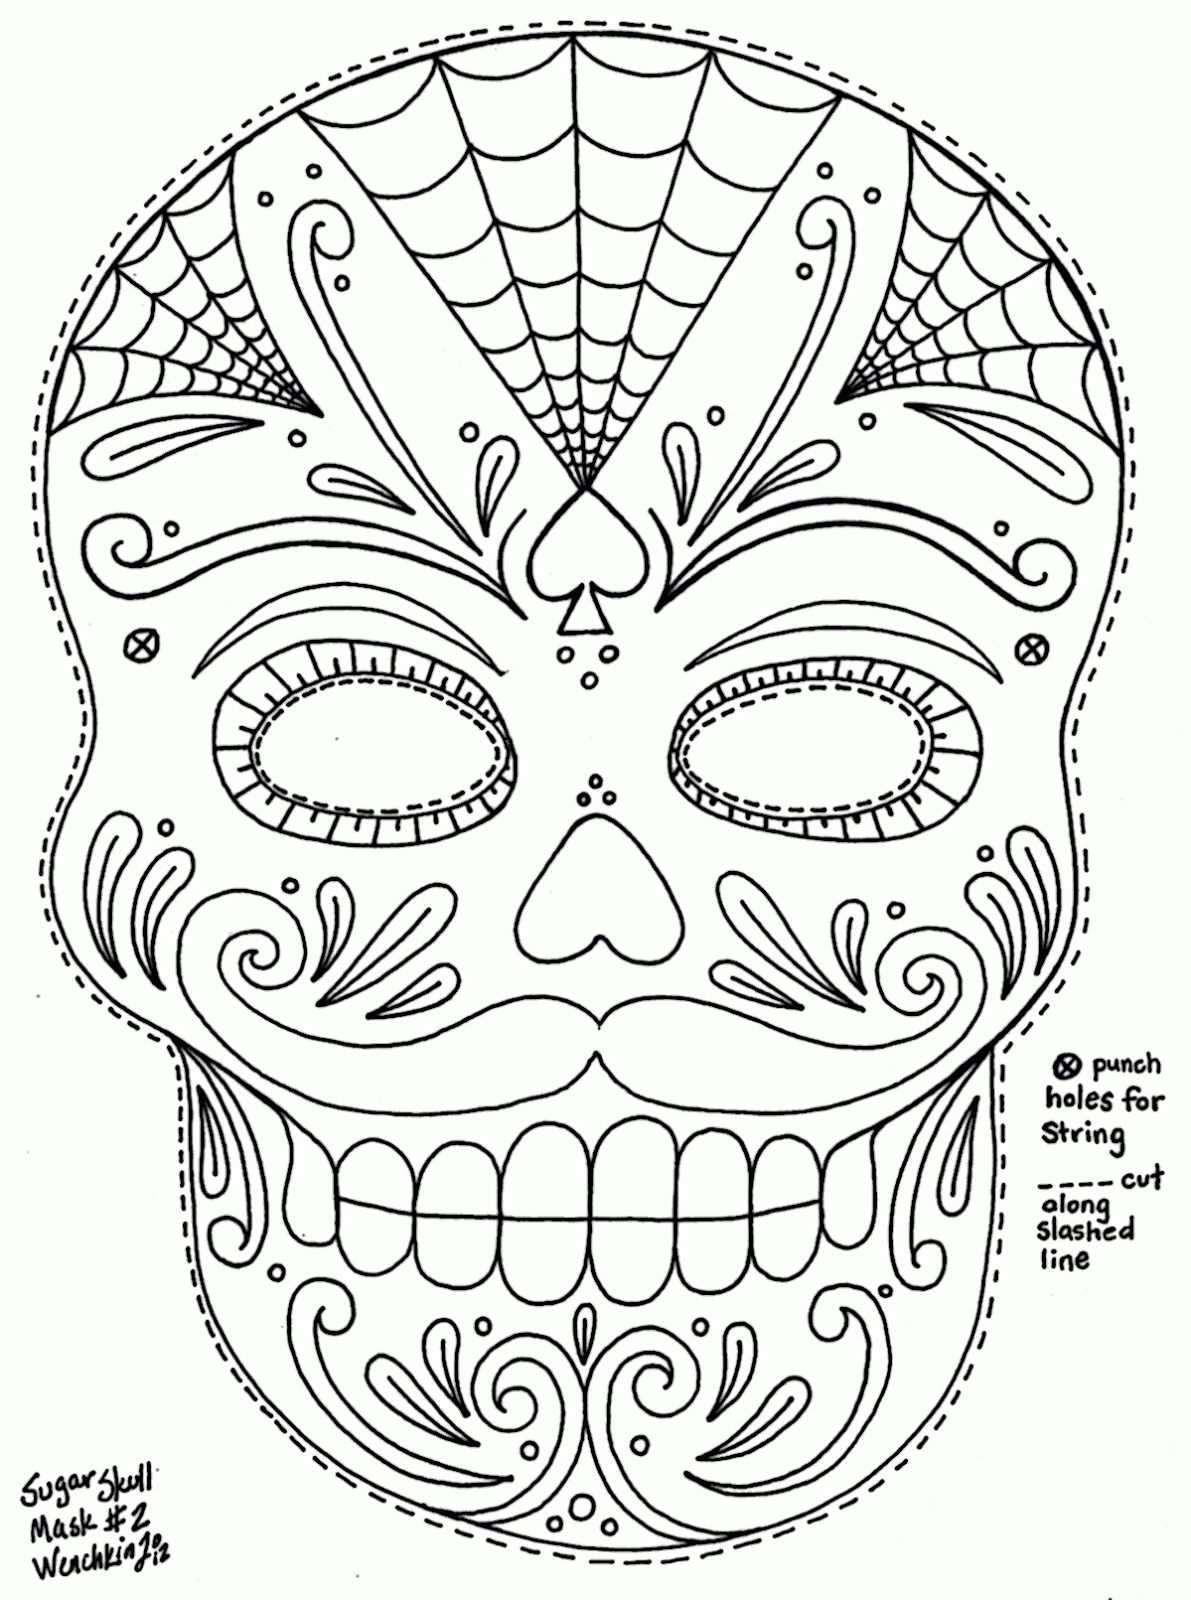 Free Halloween Scary Masks Coloring Pages, Download Free Halloween